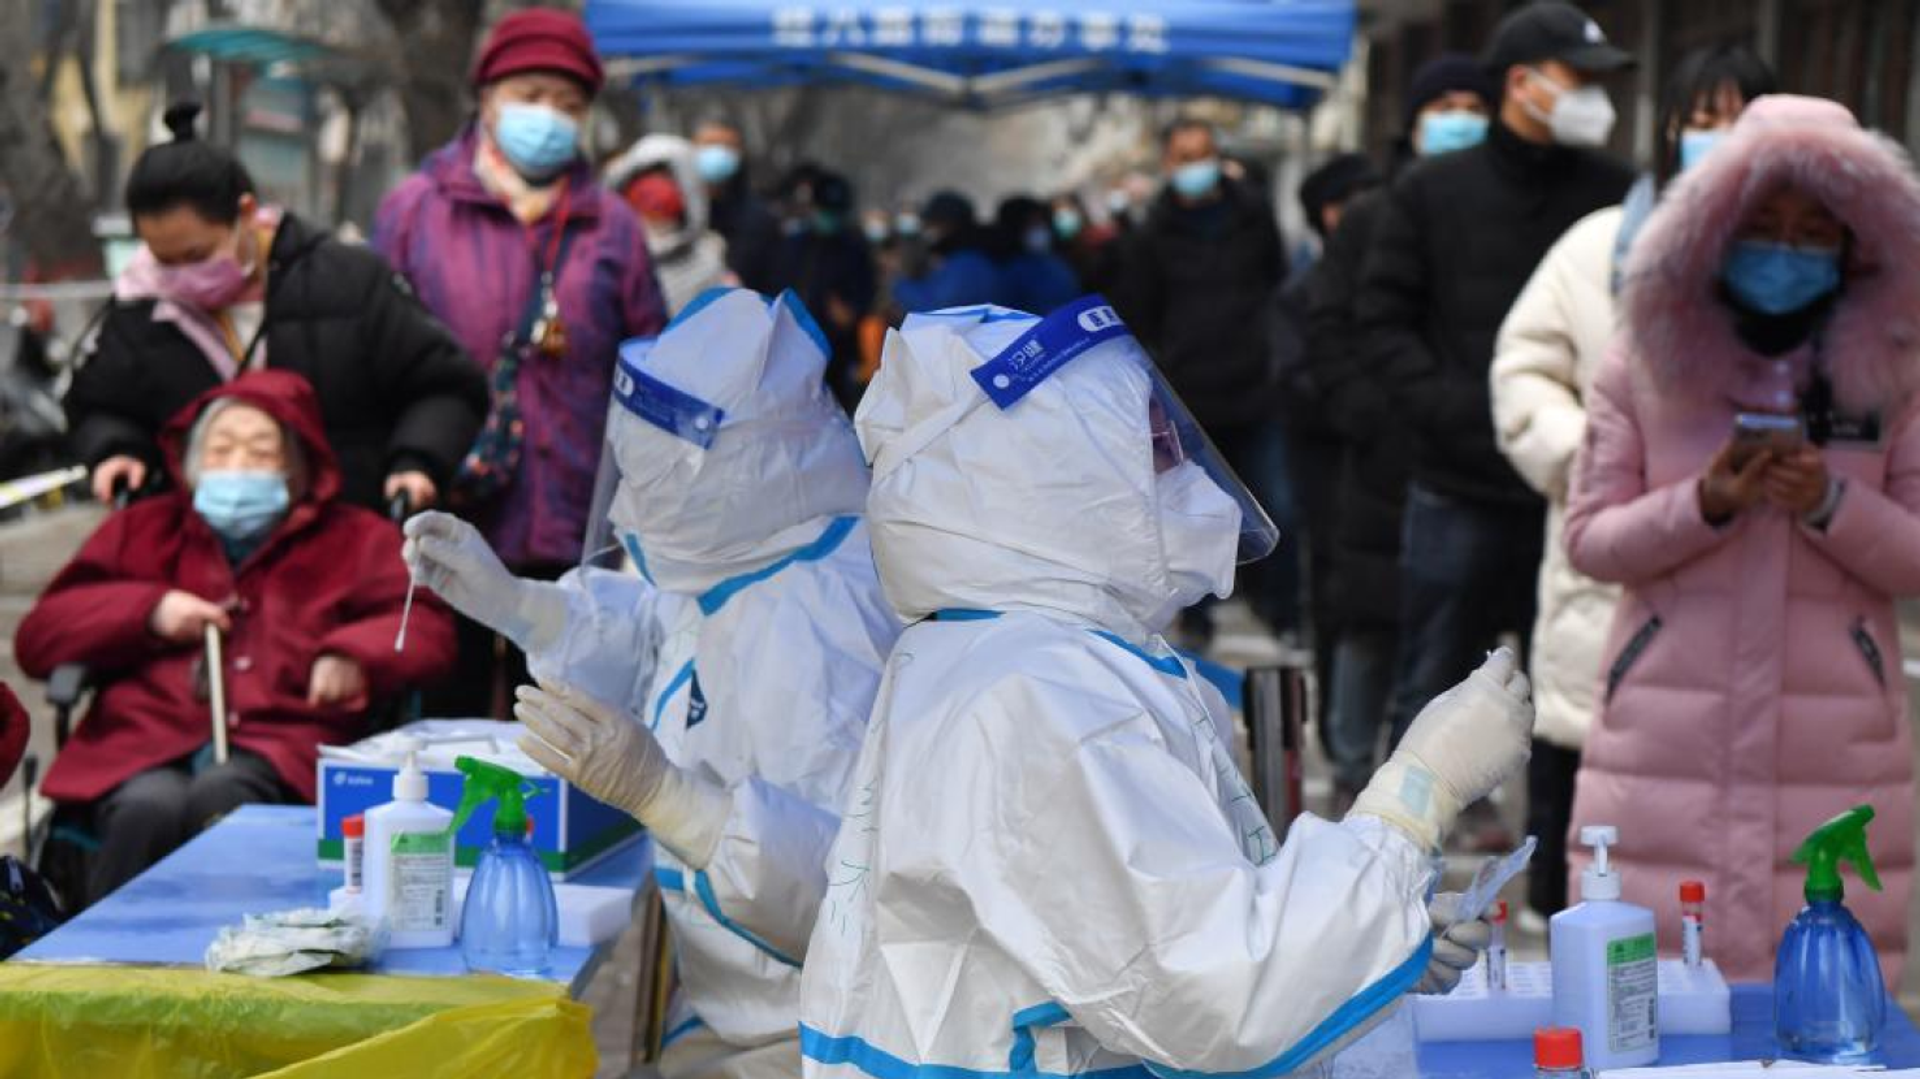 Medical workers take swab samples for COVID-19 tests at a testing site in Zhengzhou, central China's Henan Province, Jan. 7, 2022. - Sputnik International, 1920, 27.06.2022